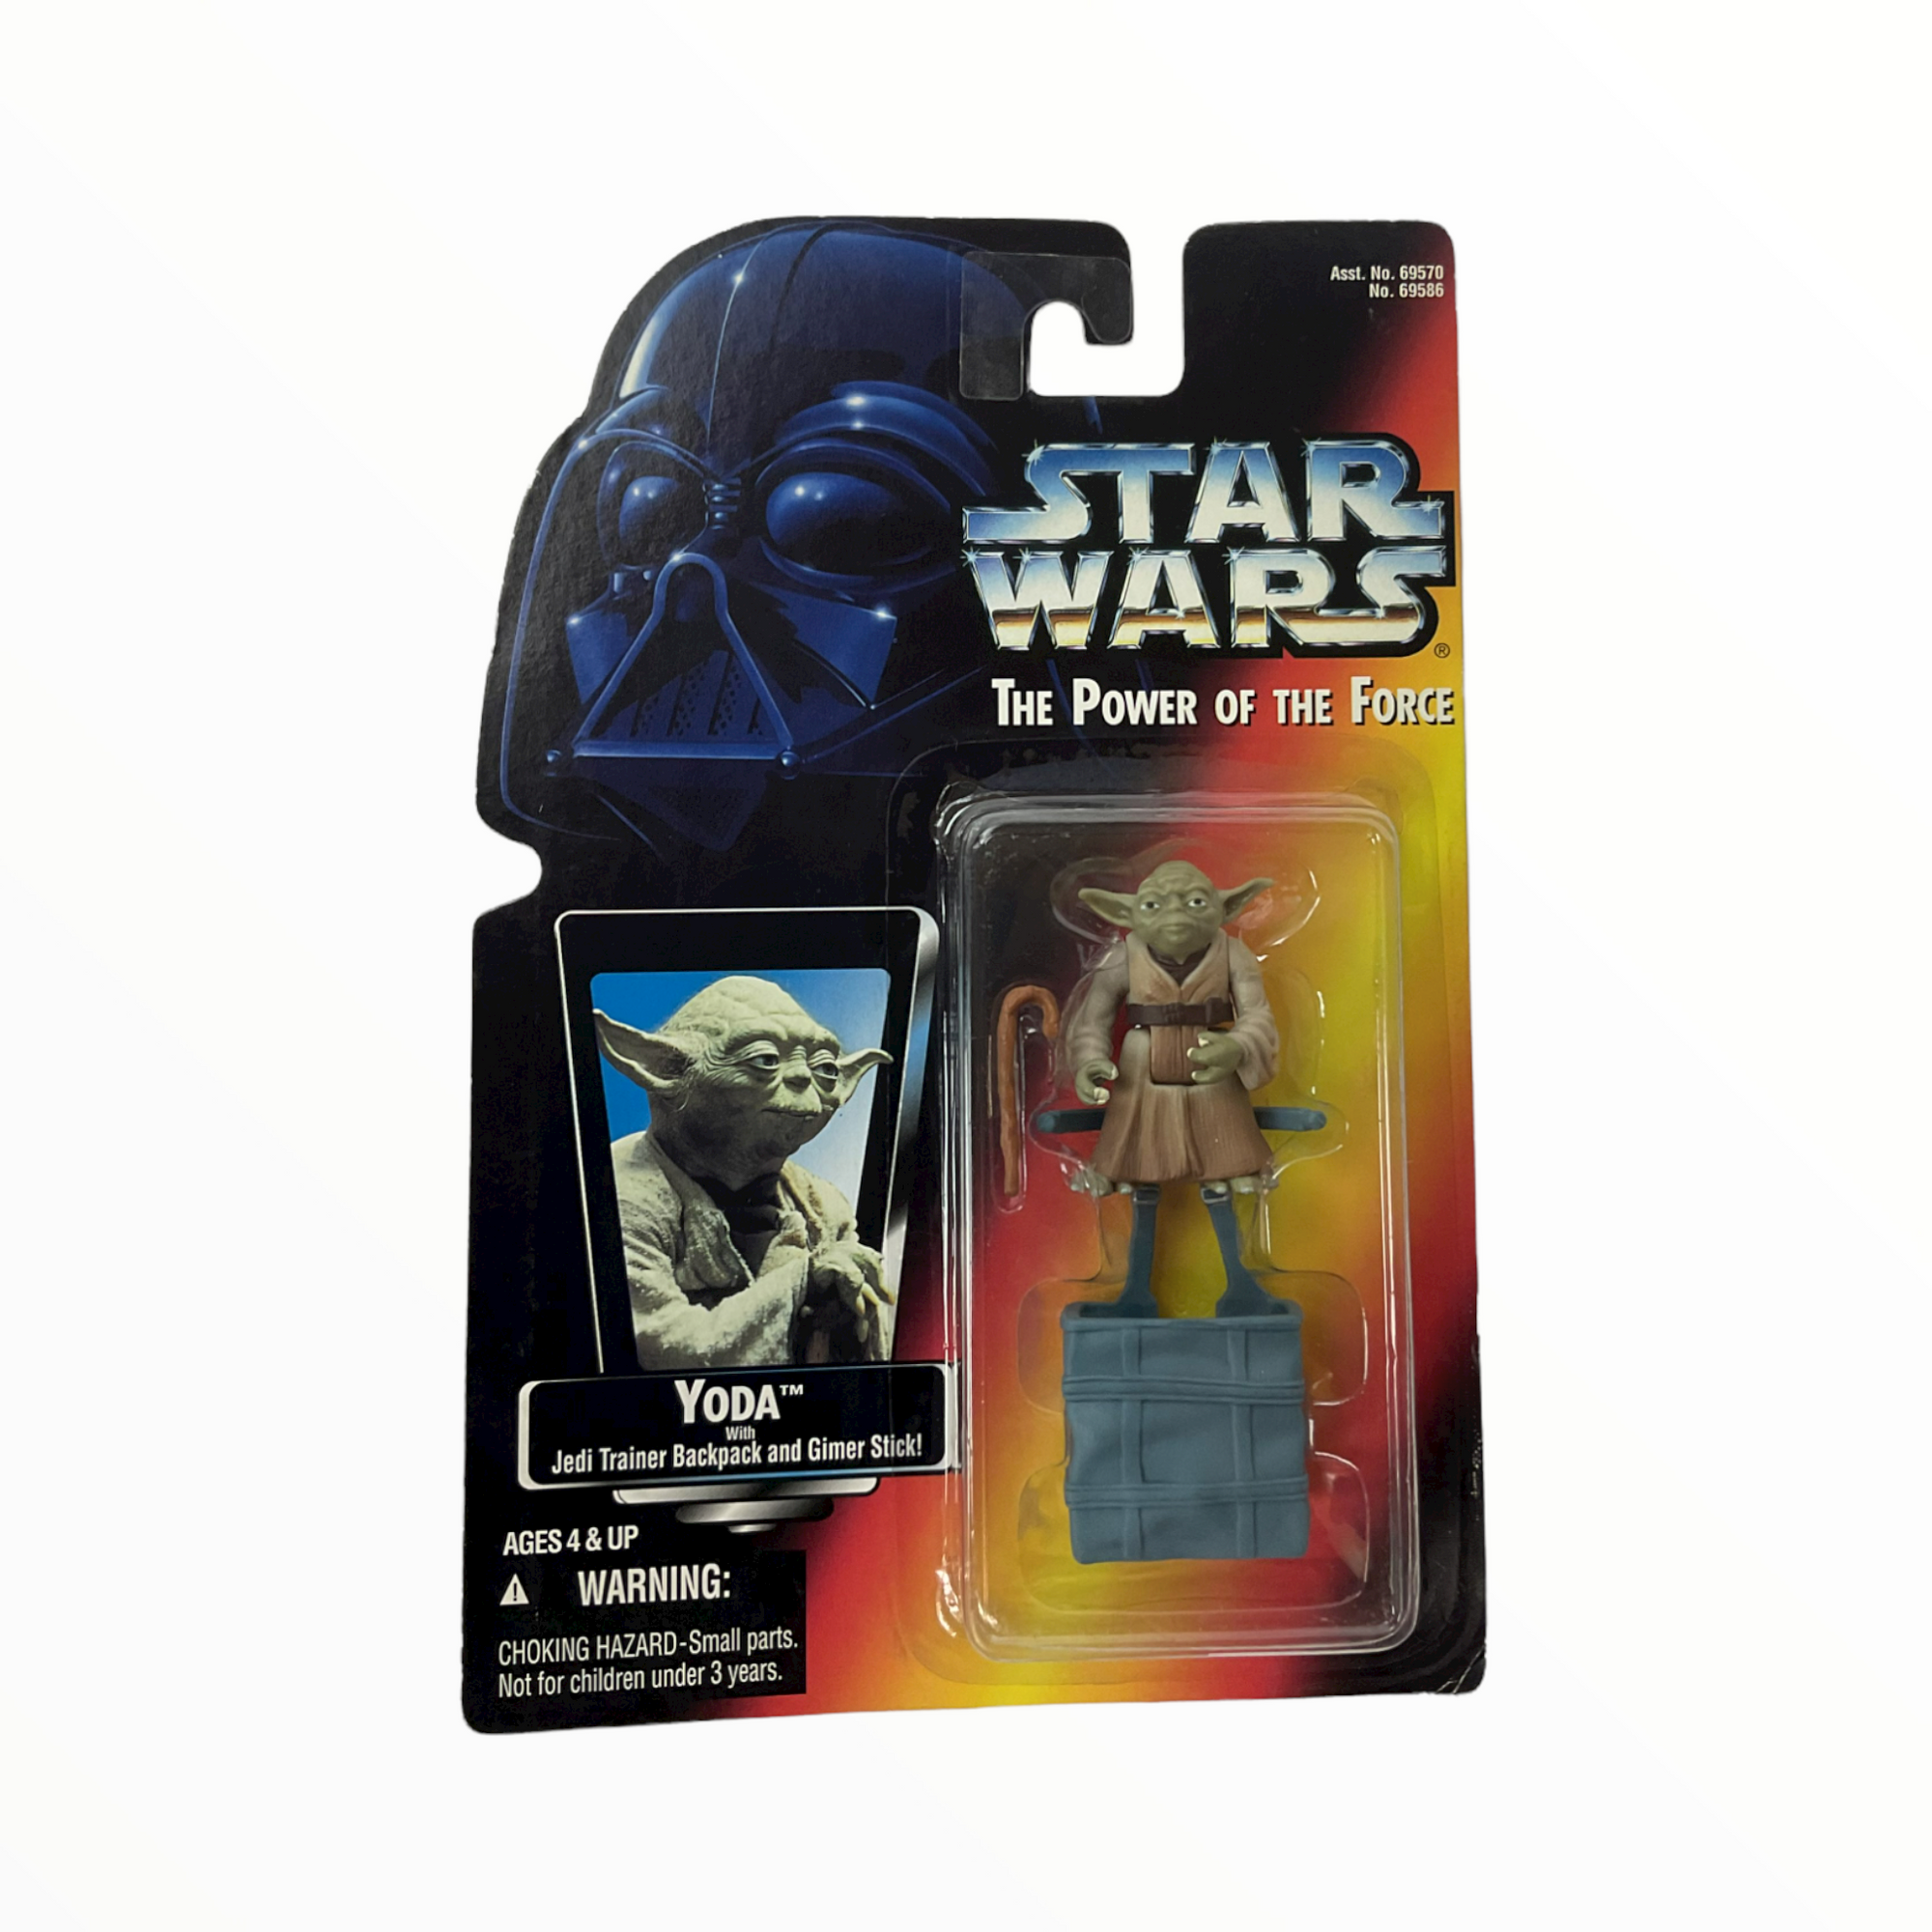 Star Wars, The Power of the Force Green Card, Yoda Action Figure, 3.75 Inches